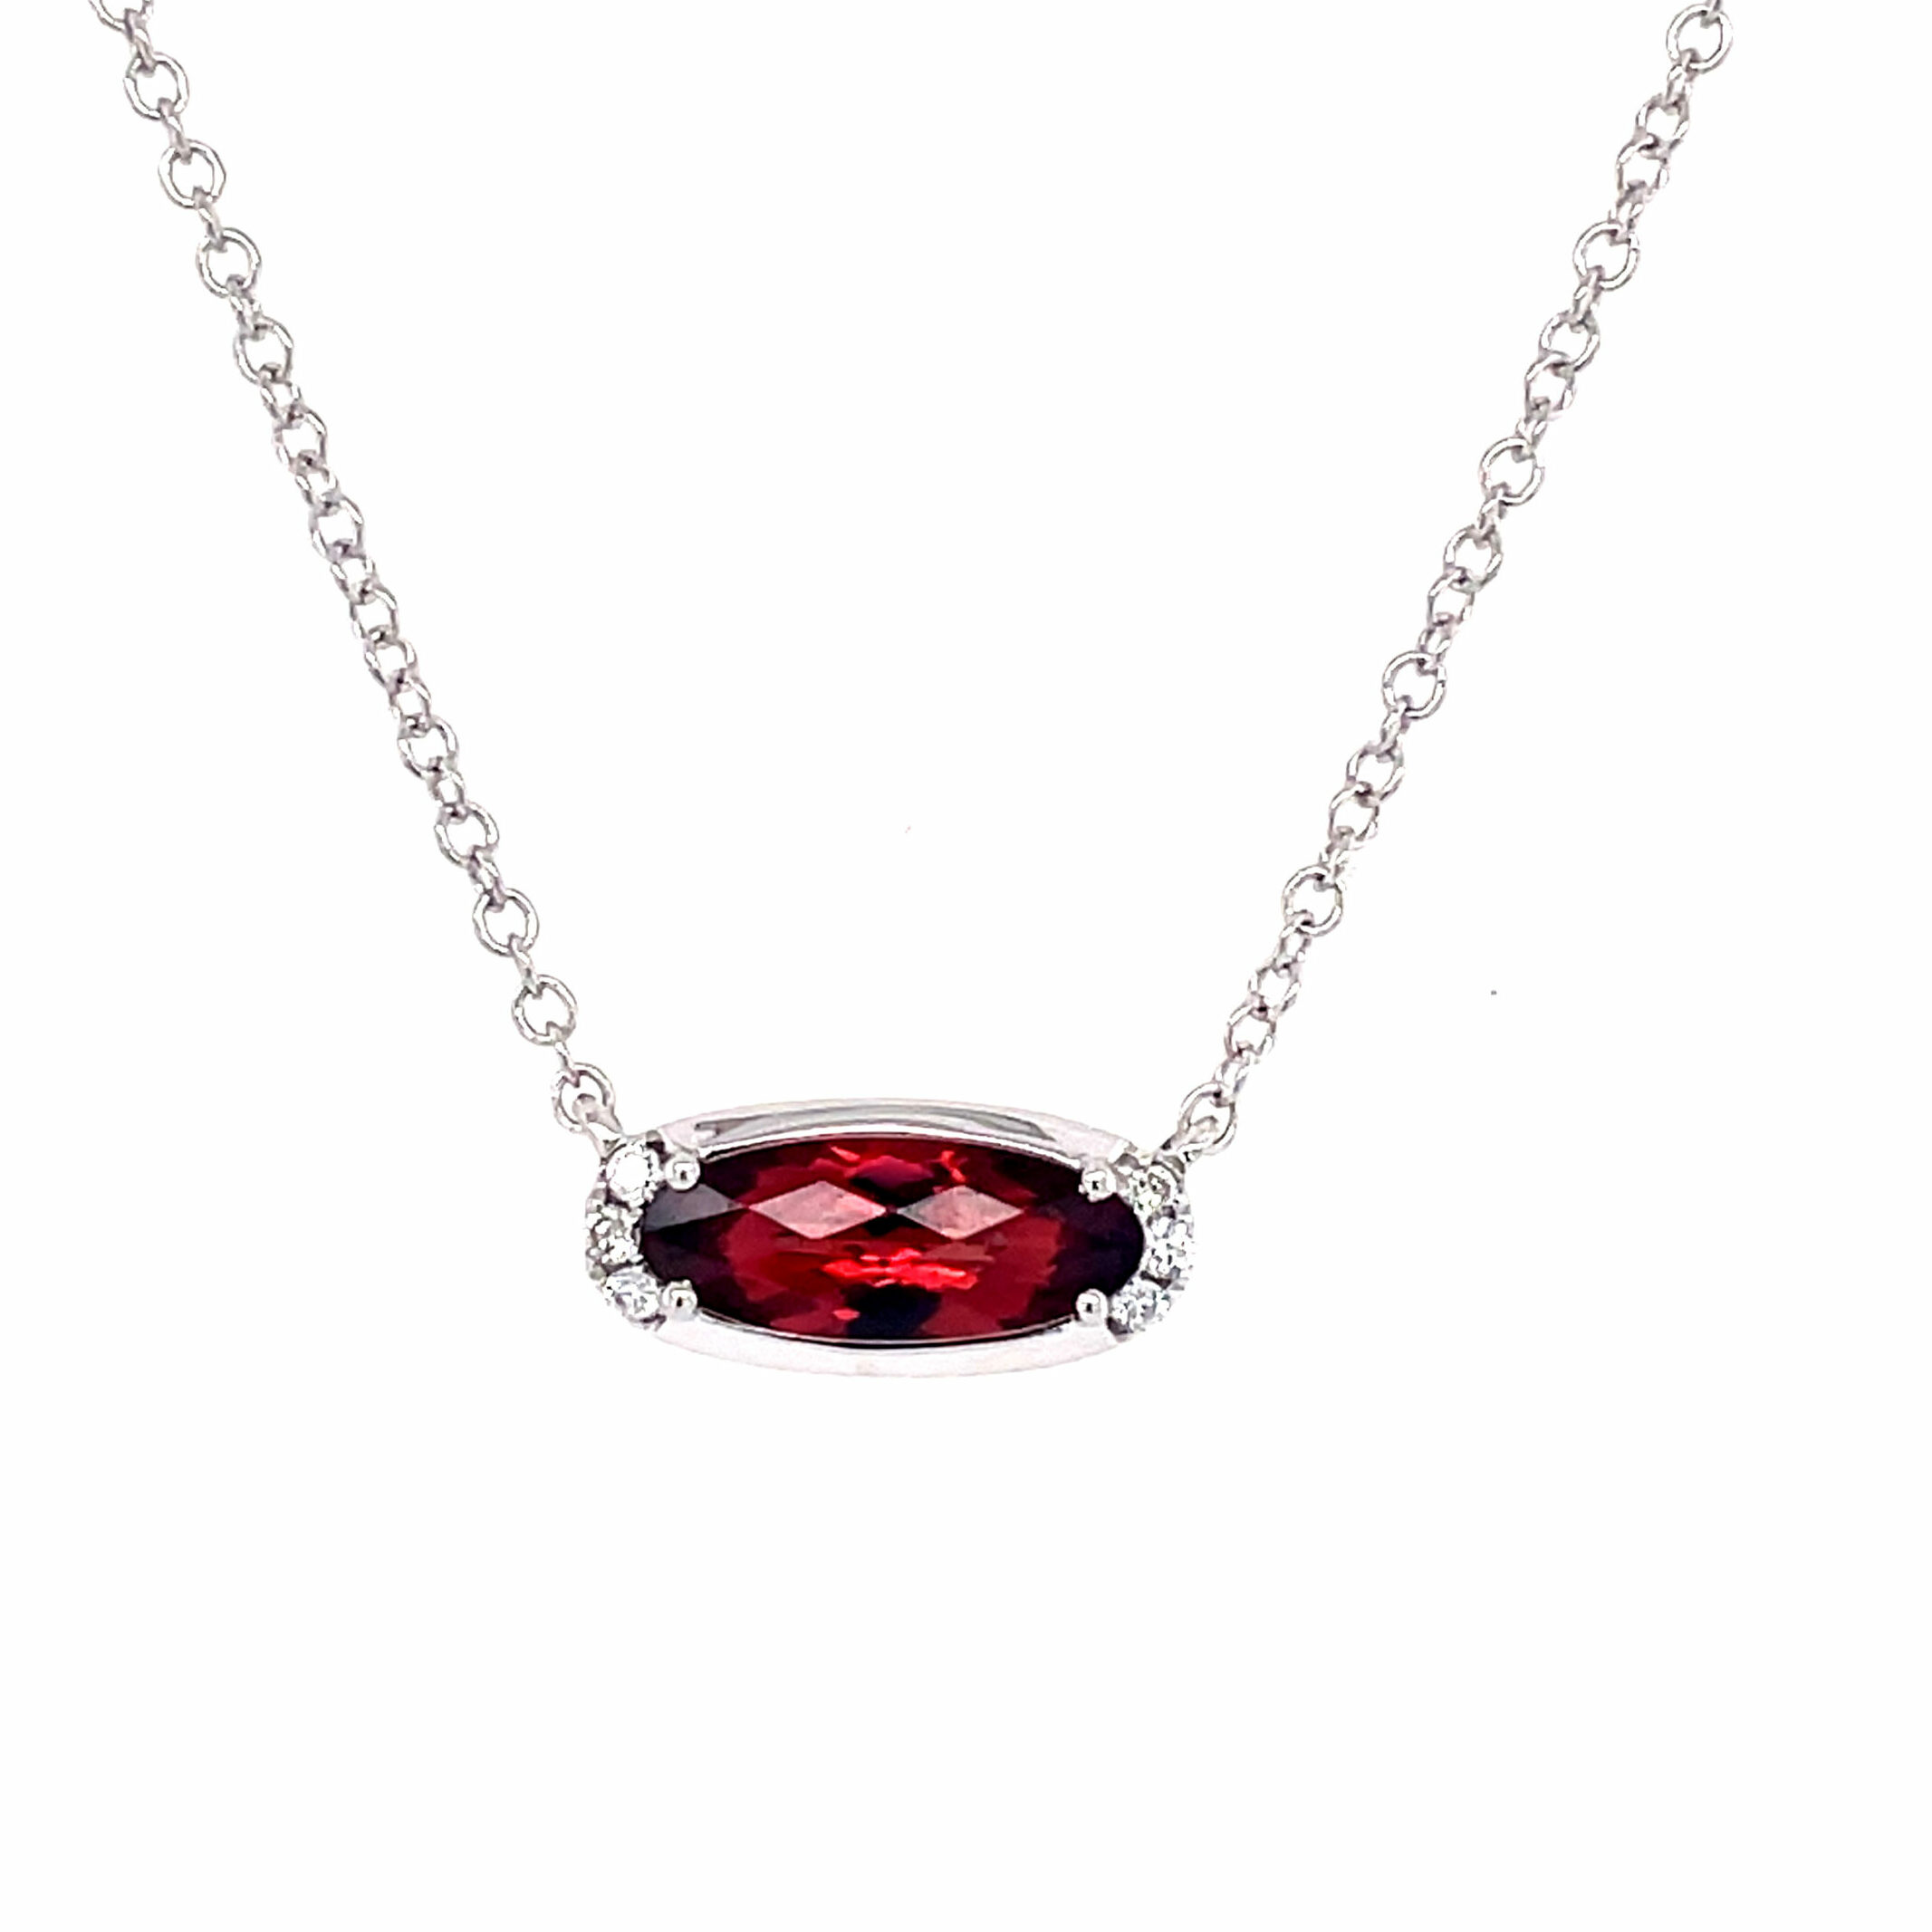 White Gold Garnet and Diamond Necklace